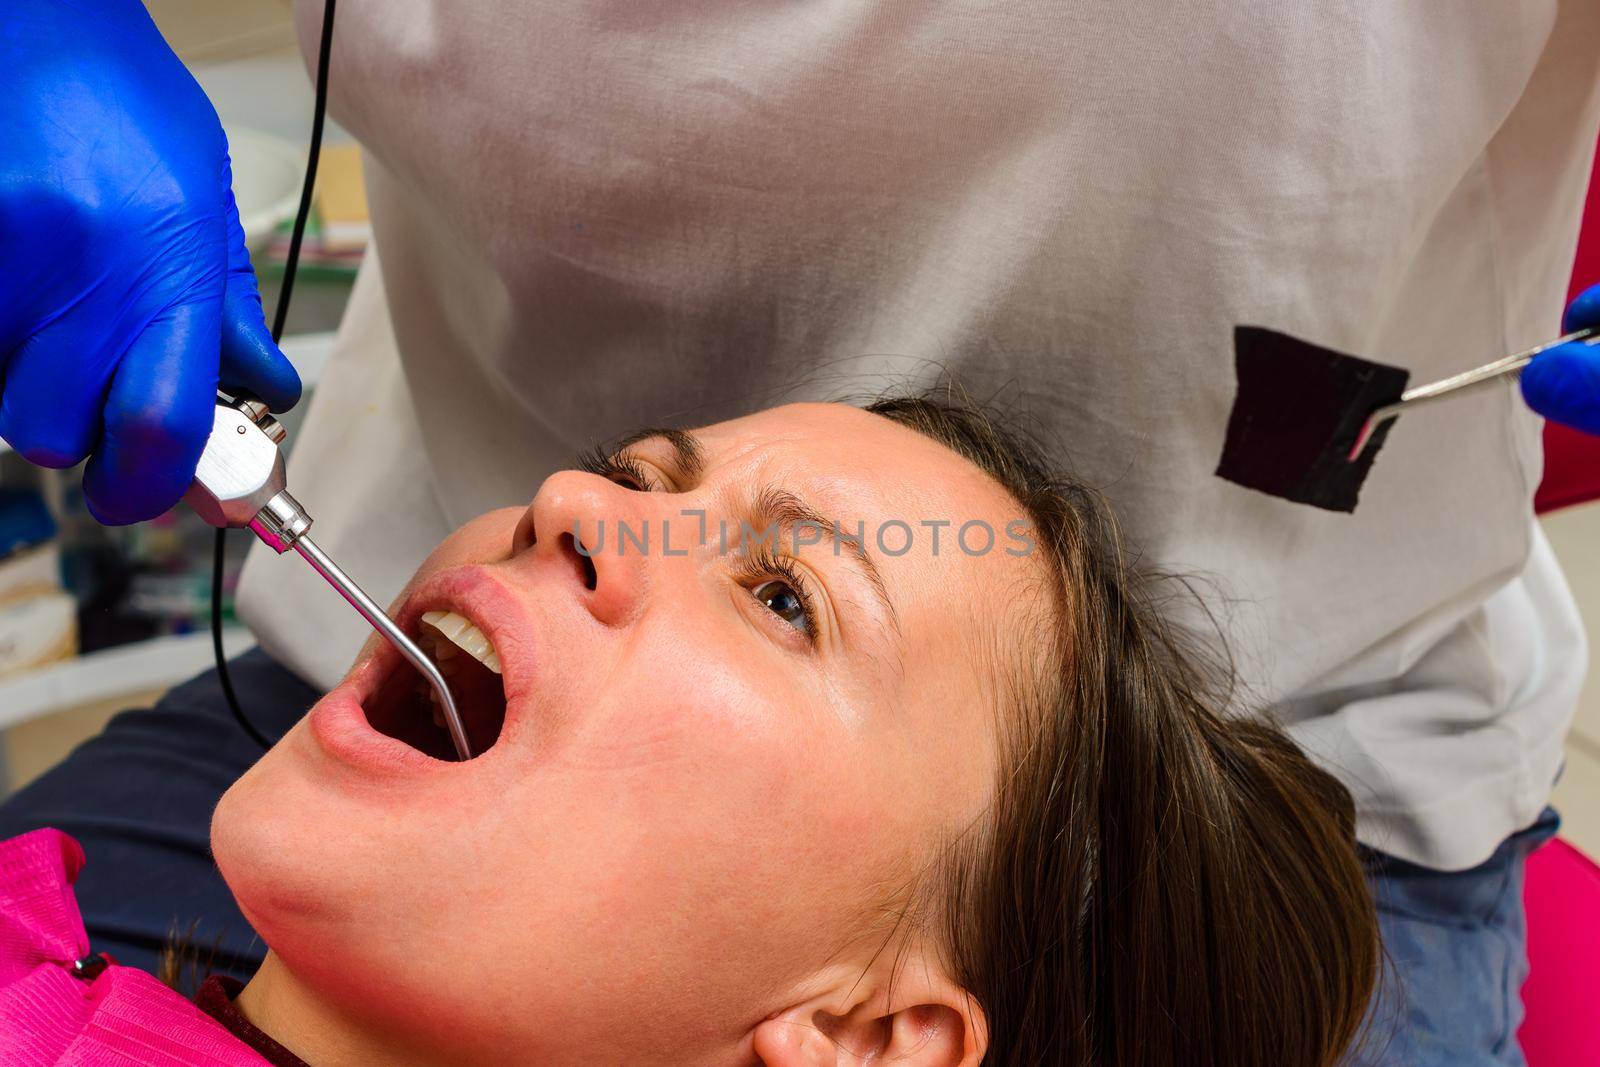 The dentist washes the tooth treatment site with water, washes away the blood and tooth debris.2020